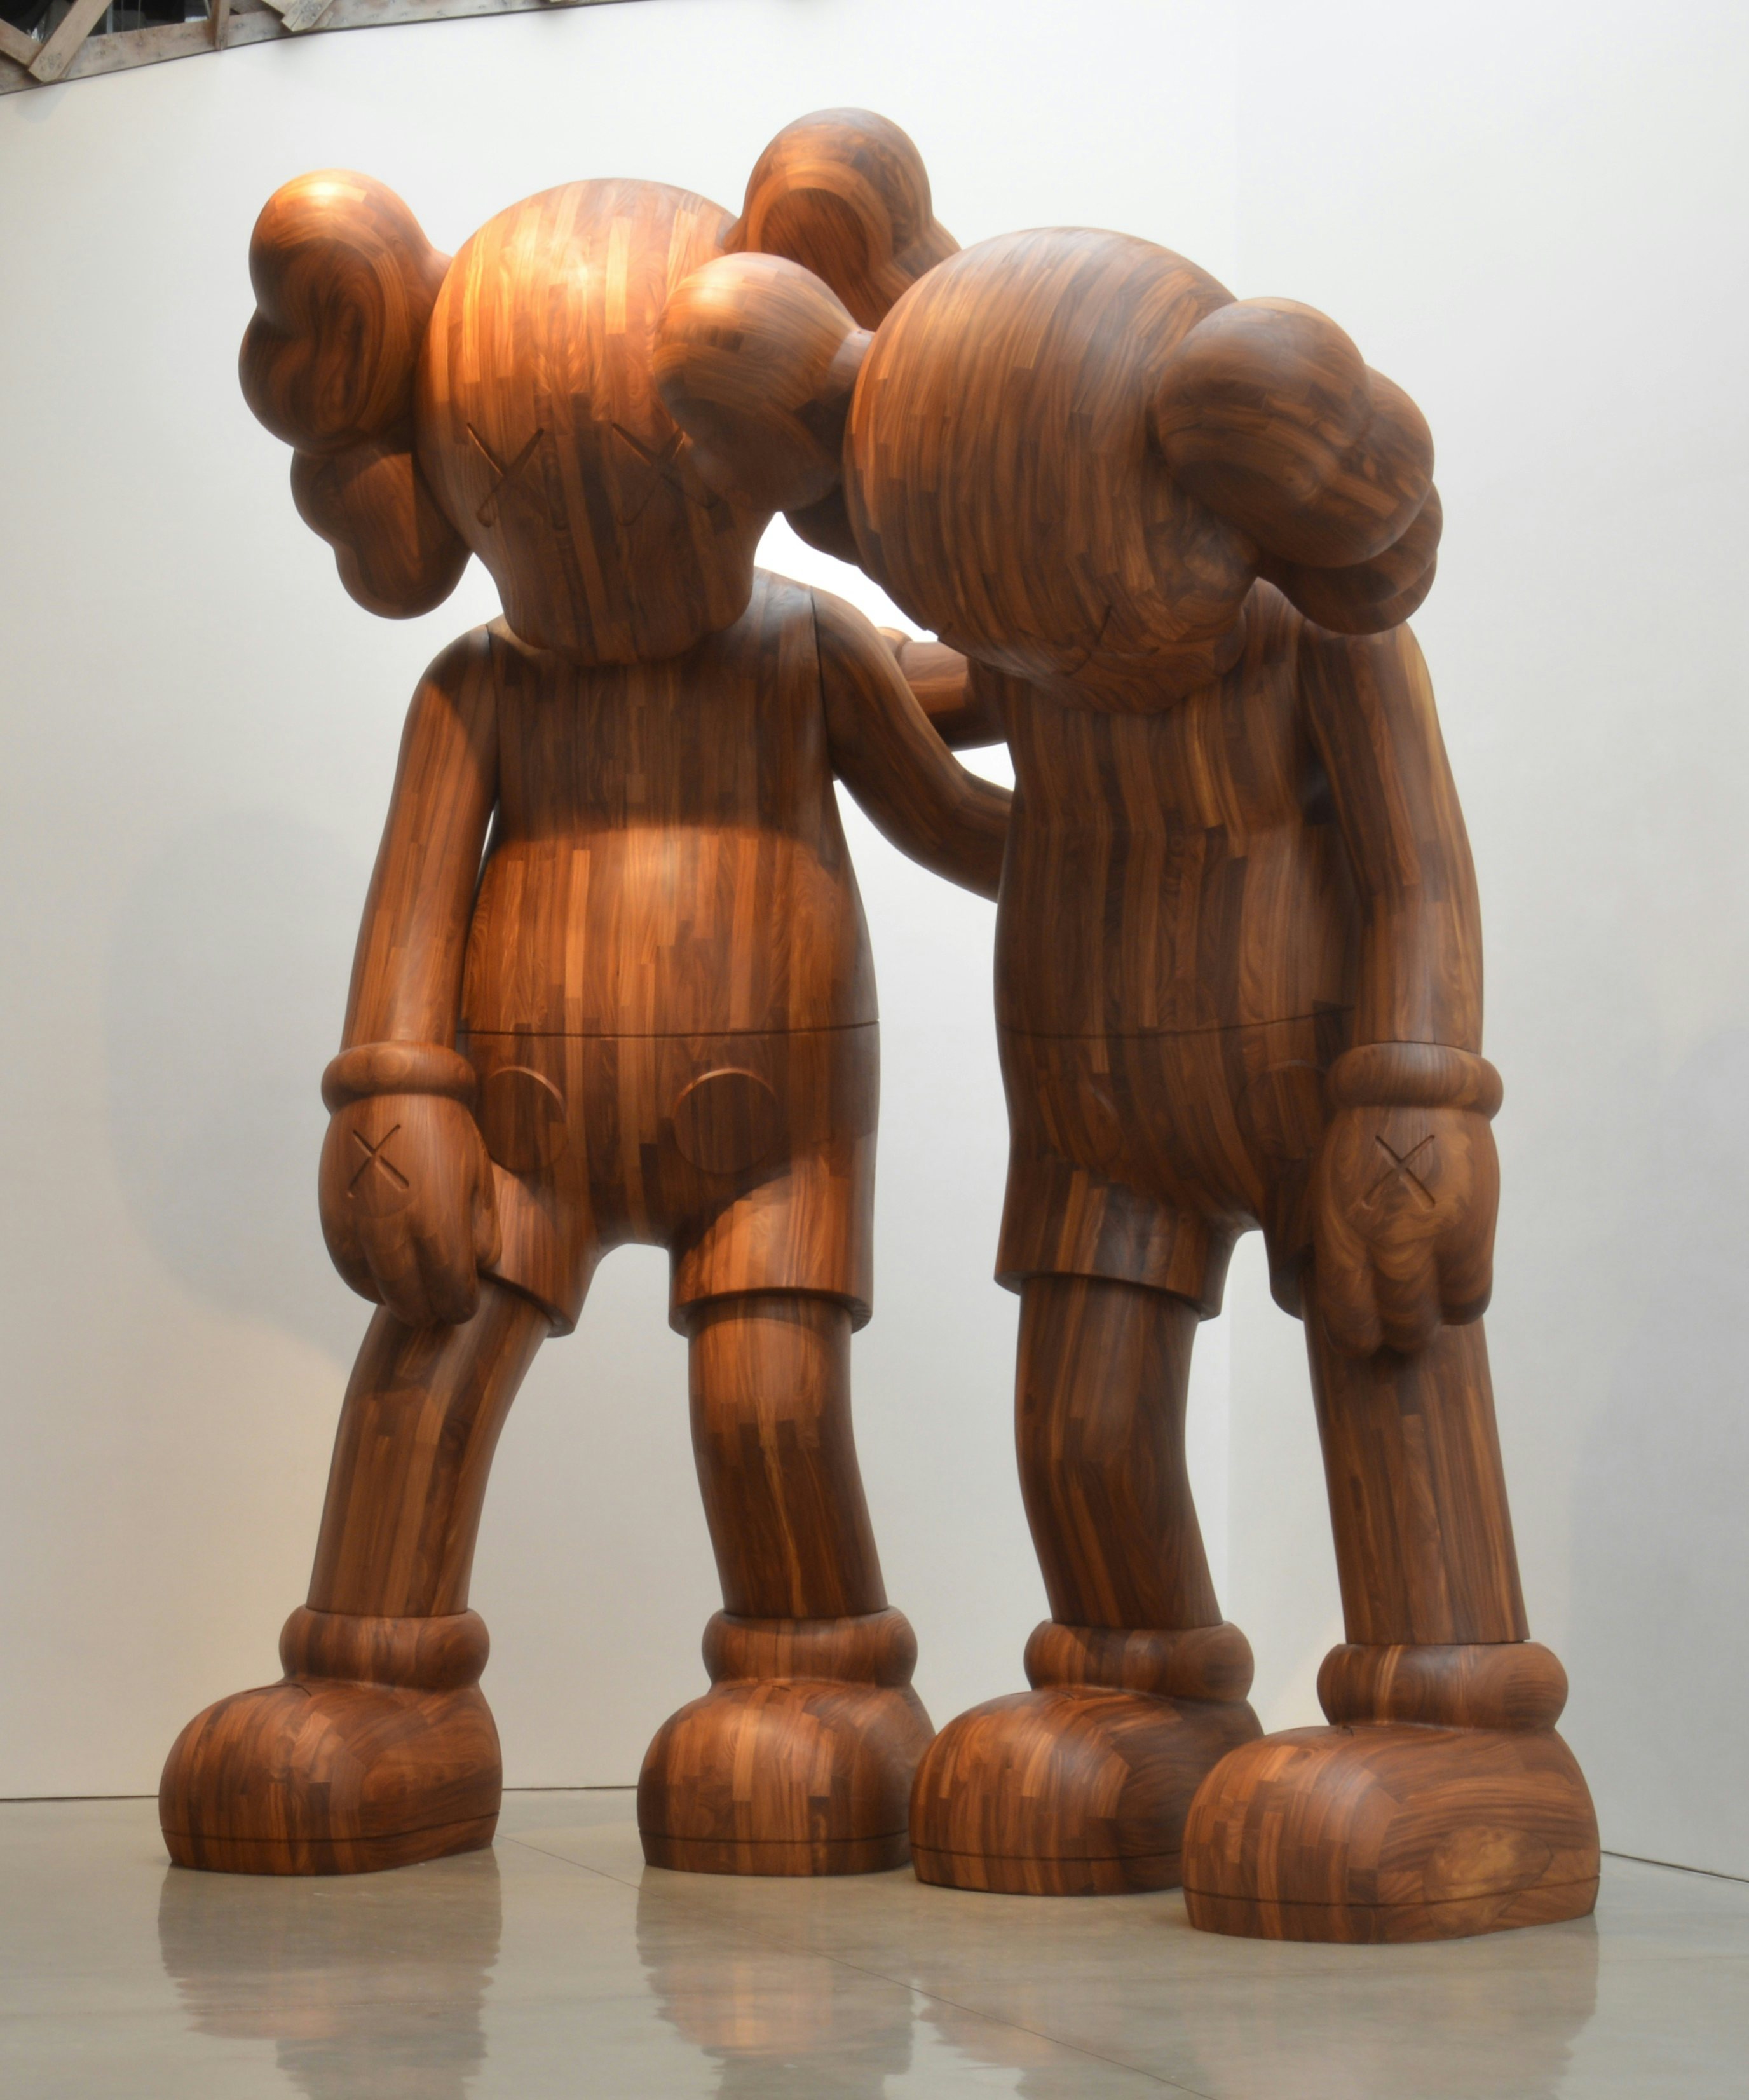 The KAWS "ALONG THE WAY" (2013) wooden sculpture from the collection of the artist will be on display at the Yuz exhibition. (Courtesy of Yuz Museum, collection of the artist)